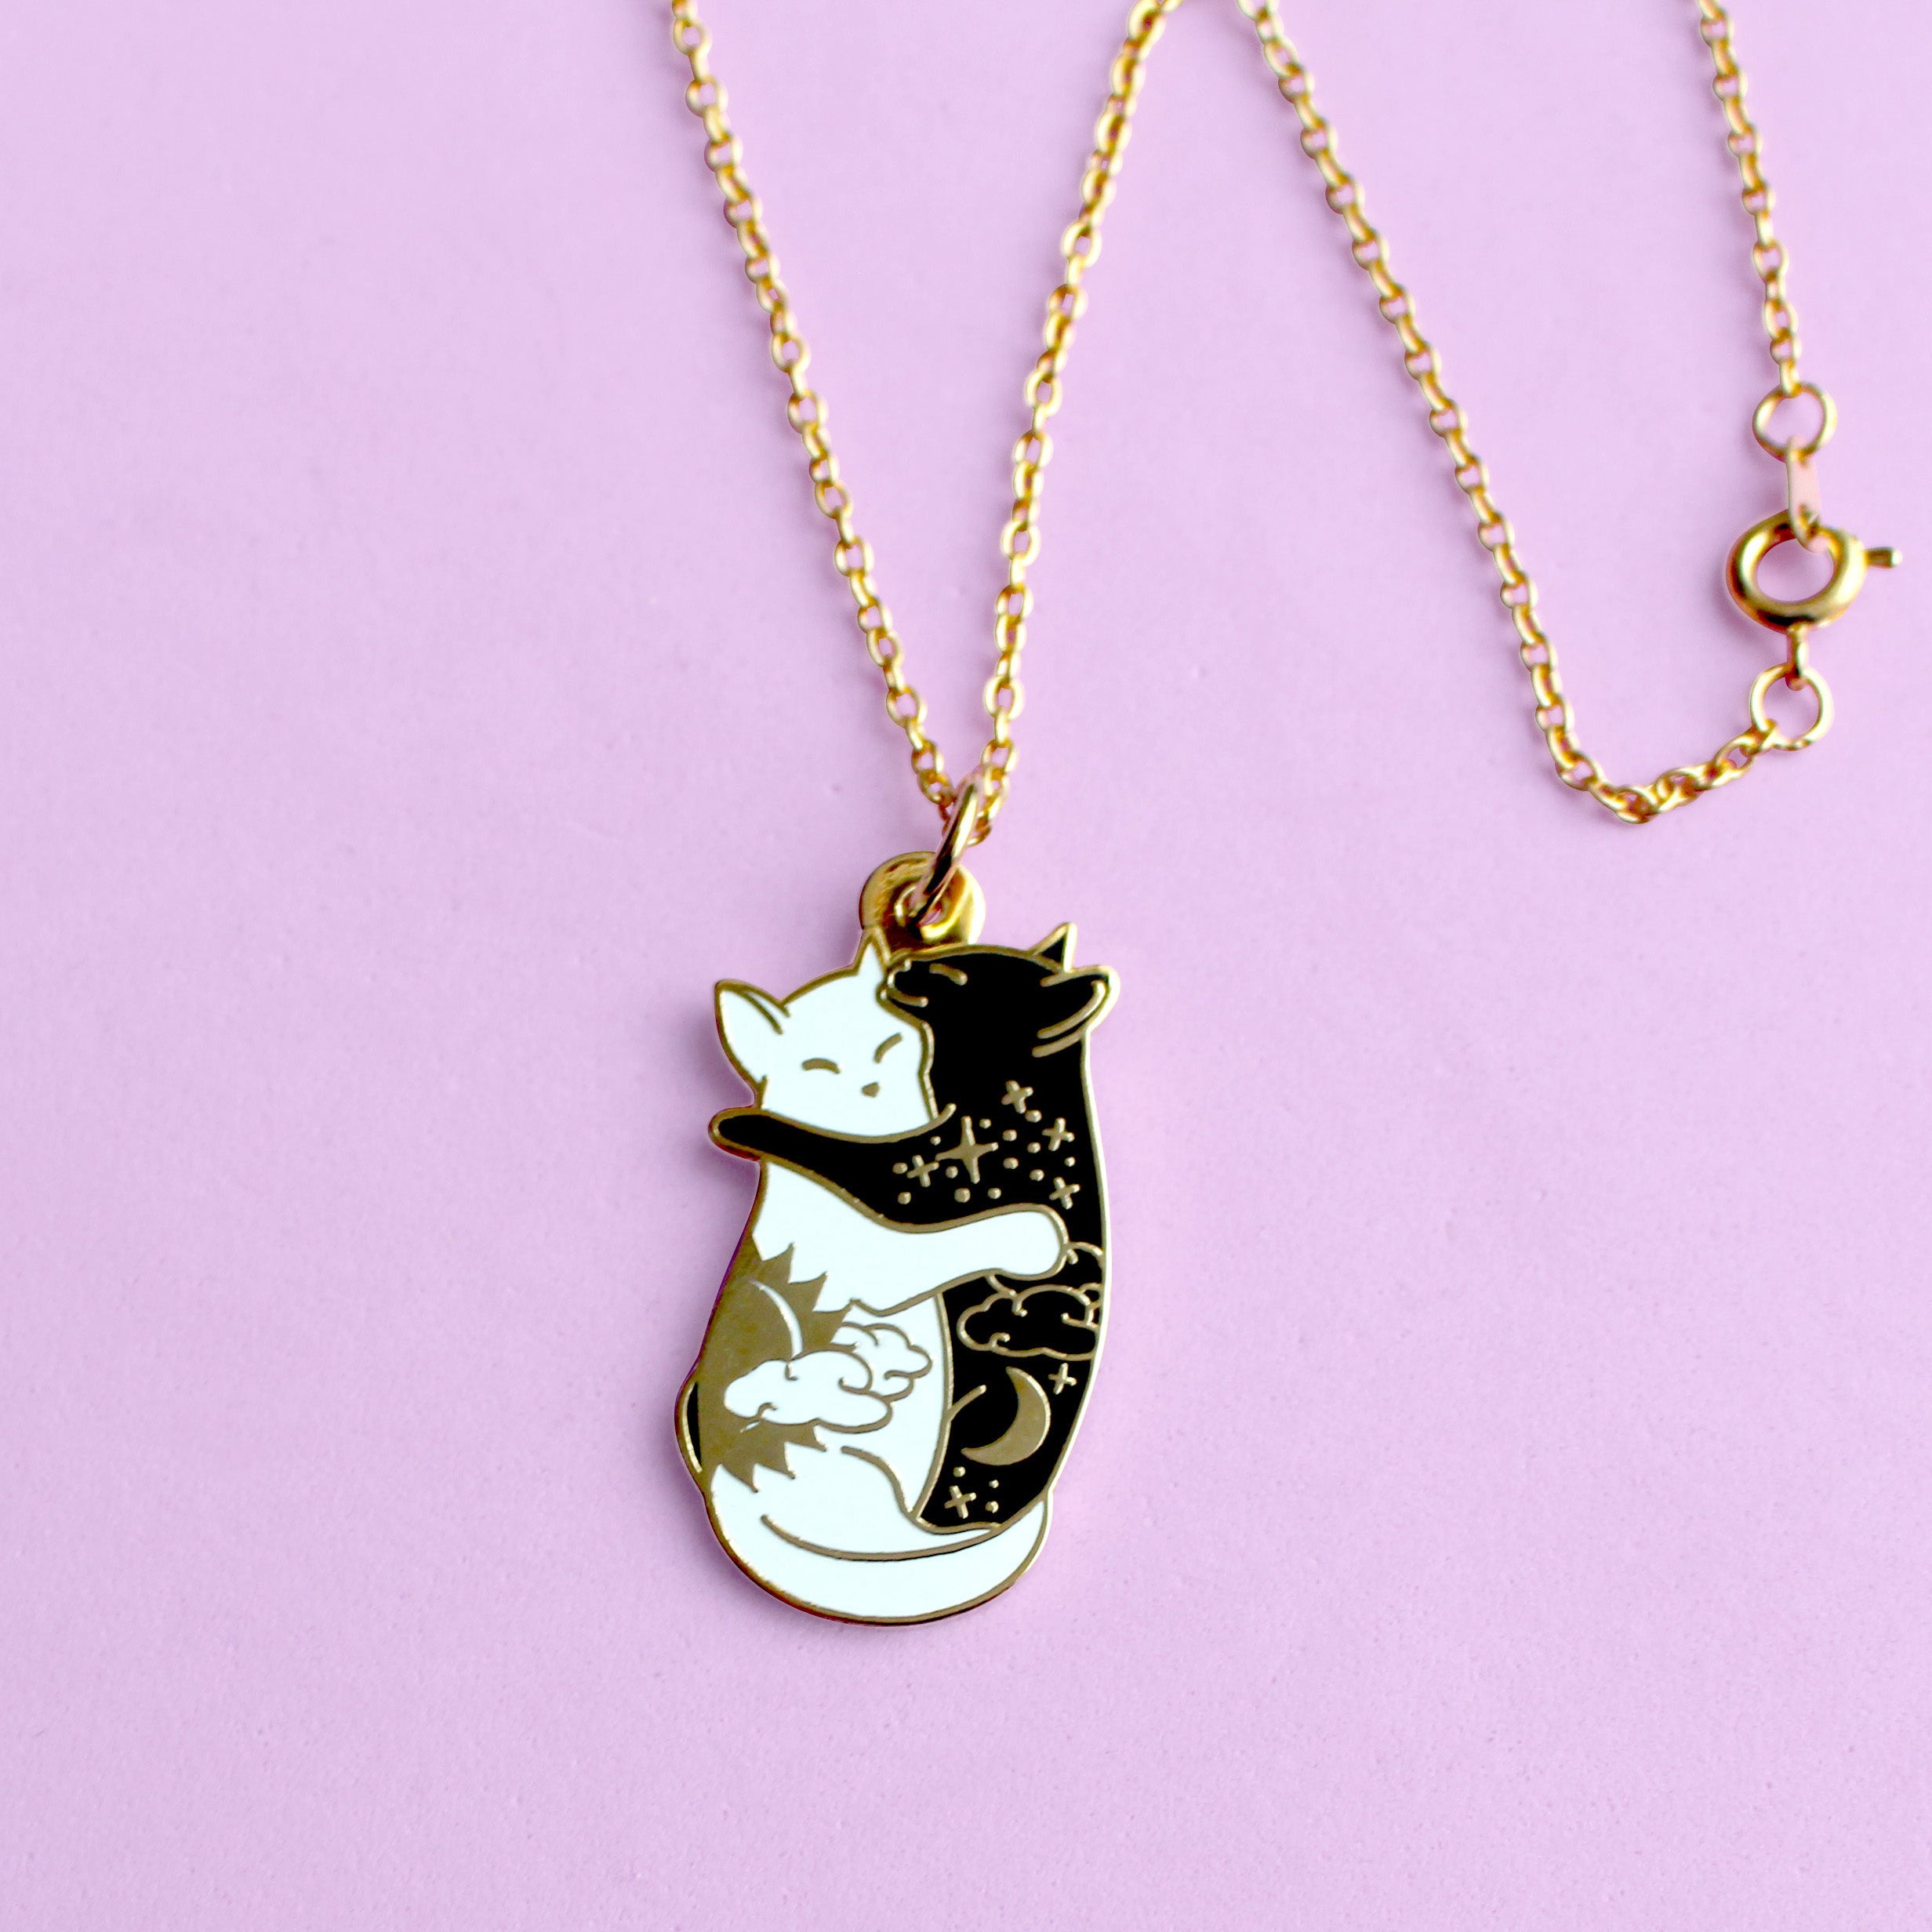 Black Cat Necklace in Sterling Silver, Resin and Diamond Cut Sterling  Silver Chain. Made From Recycled, Upcycled Gift Cards. - Etsy